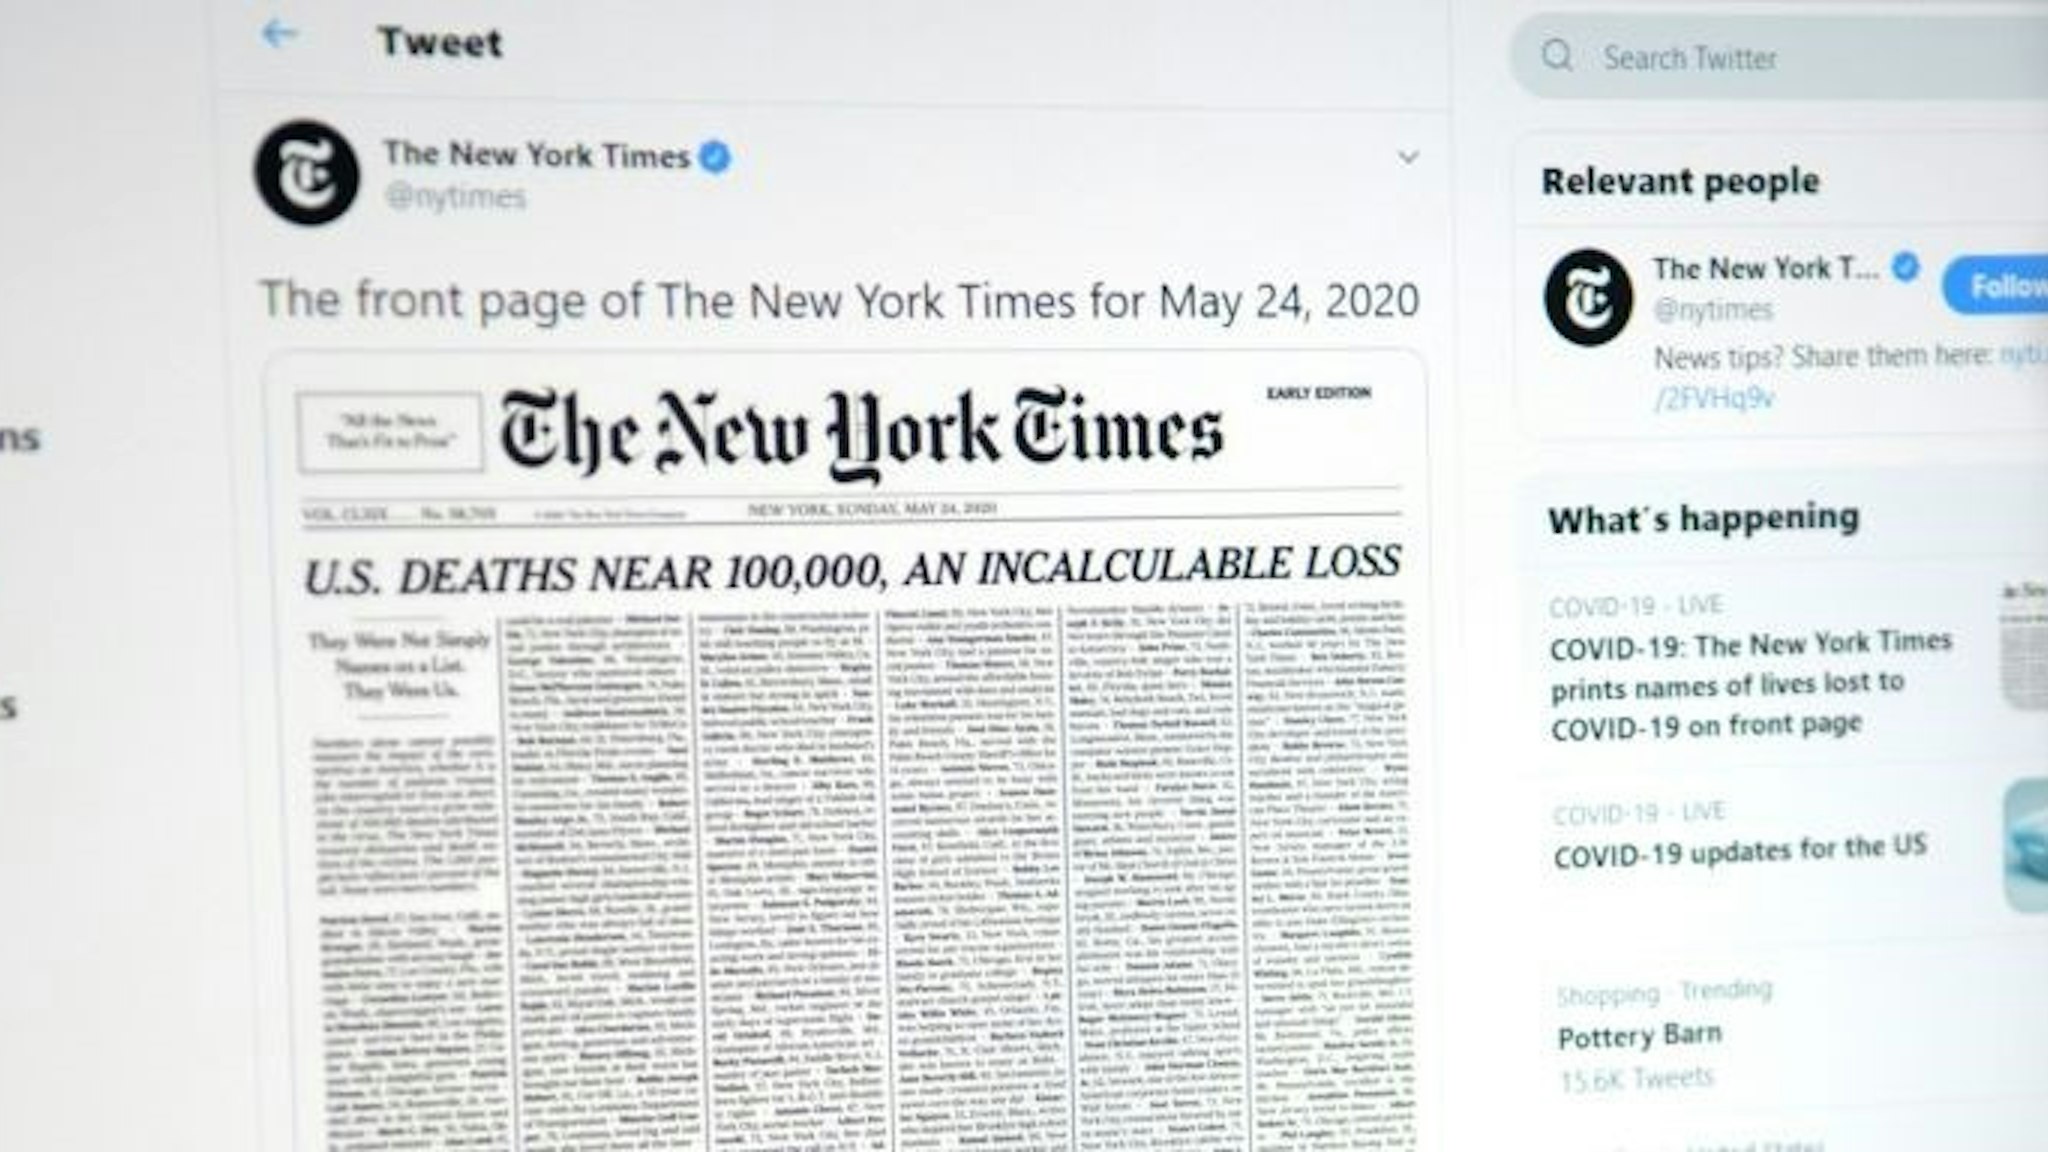 This picture taken on May 23, 2020, in Los Angeles, California, shows a woman looking at a computer screen with a tweet by the New York Times newspaper account showing the early edition front page of May 24, 2020, with a list of 1,000 names printed on it, that represents 1% of the lives lost due to the novel coronavirus pandemic, COVID-19, in the US. (Photo by Agustin PAULLIER / AFP) (Photo by